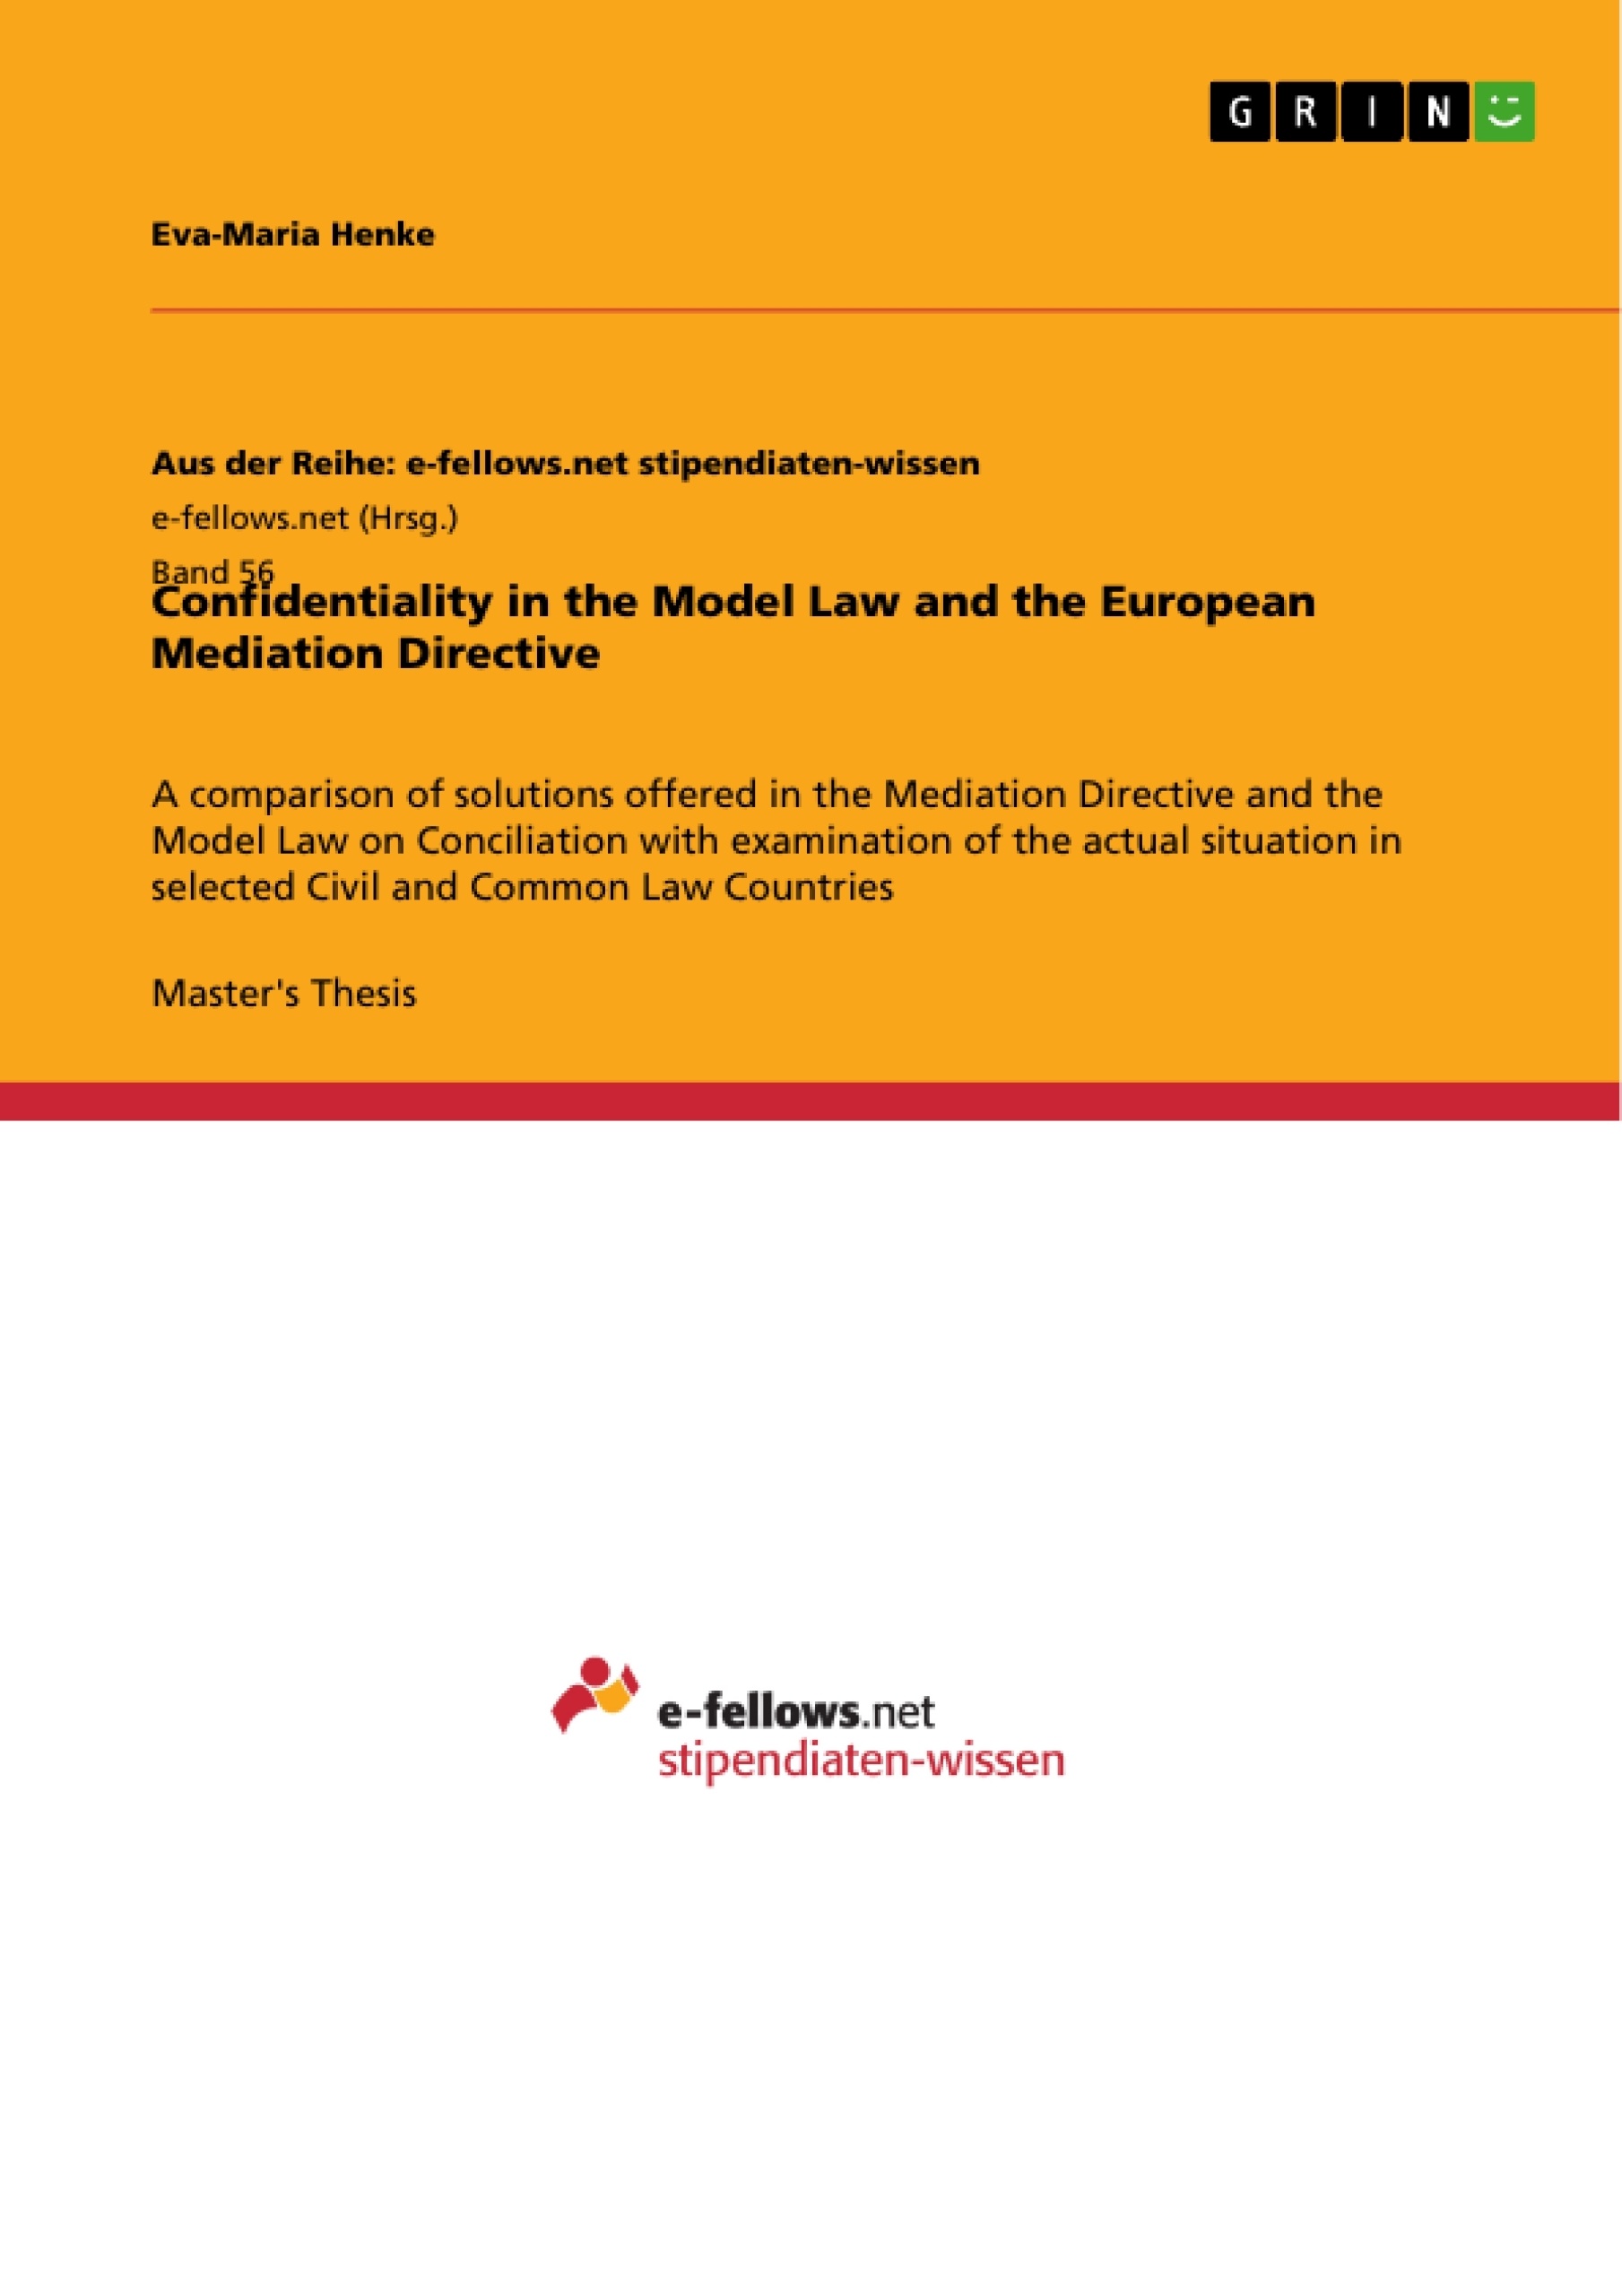 Title: Confidentiality in the Model Law and the European Mediation Directive